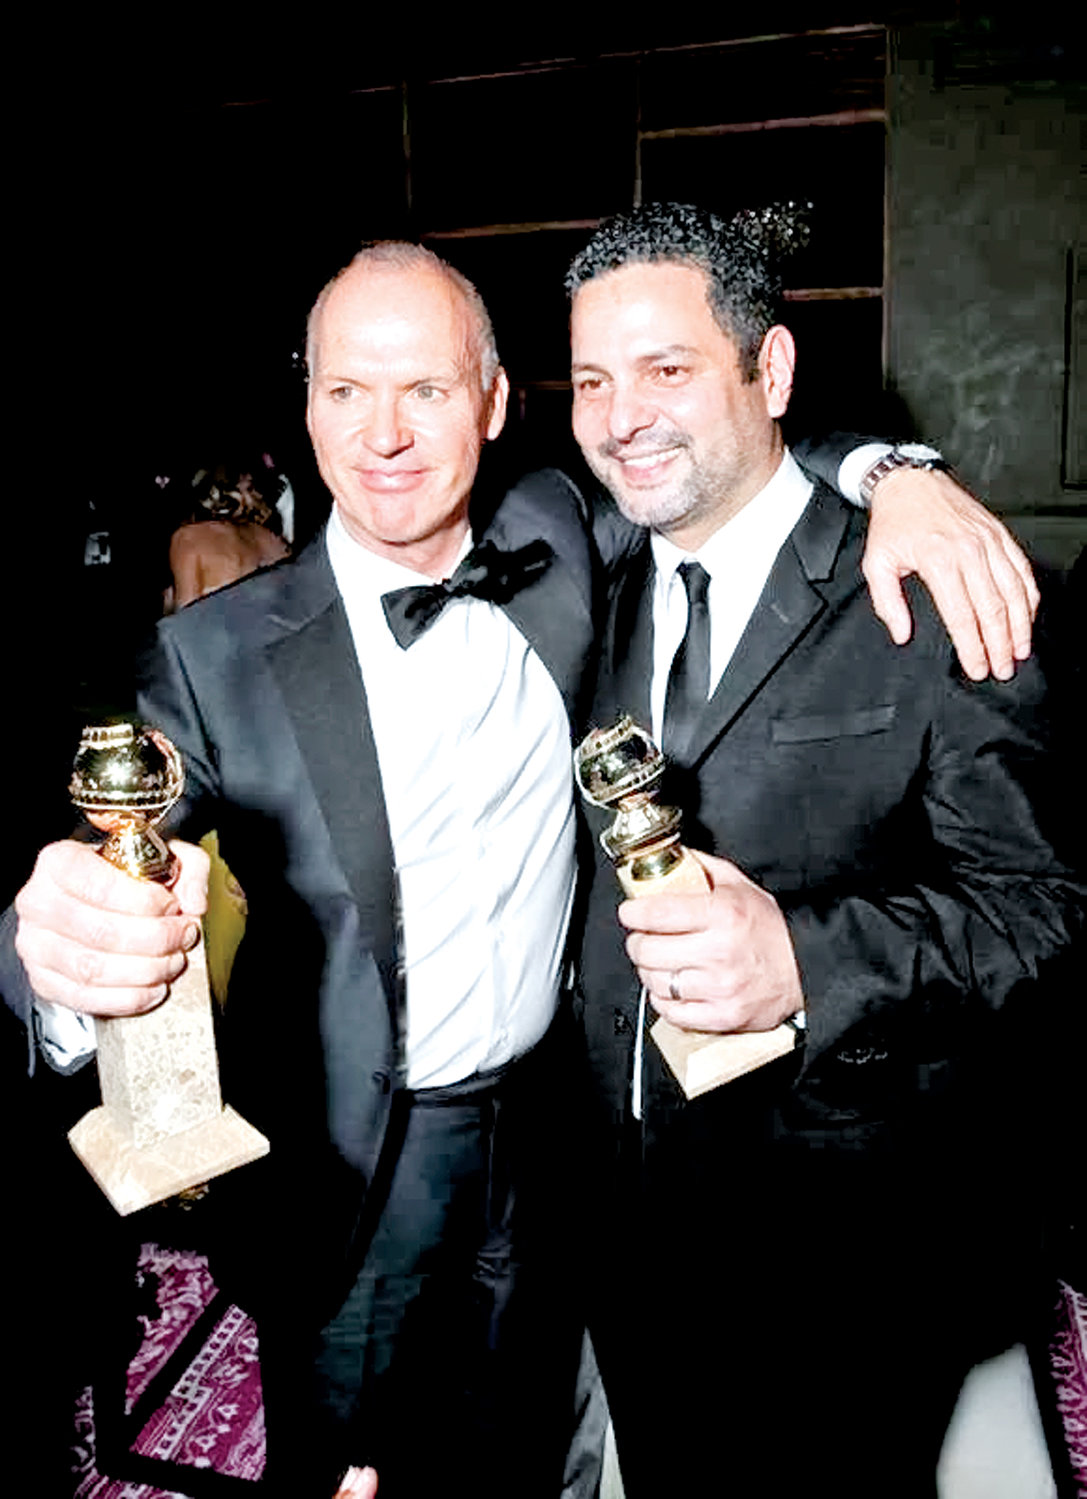 Dinelaris, right, with “Birdman” star Michael Keaton in 2015 after they both won Golden Globes for their work on the film.